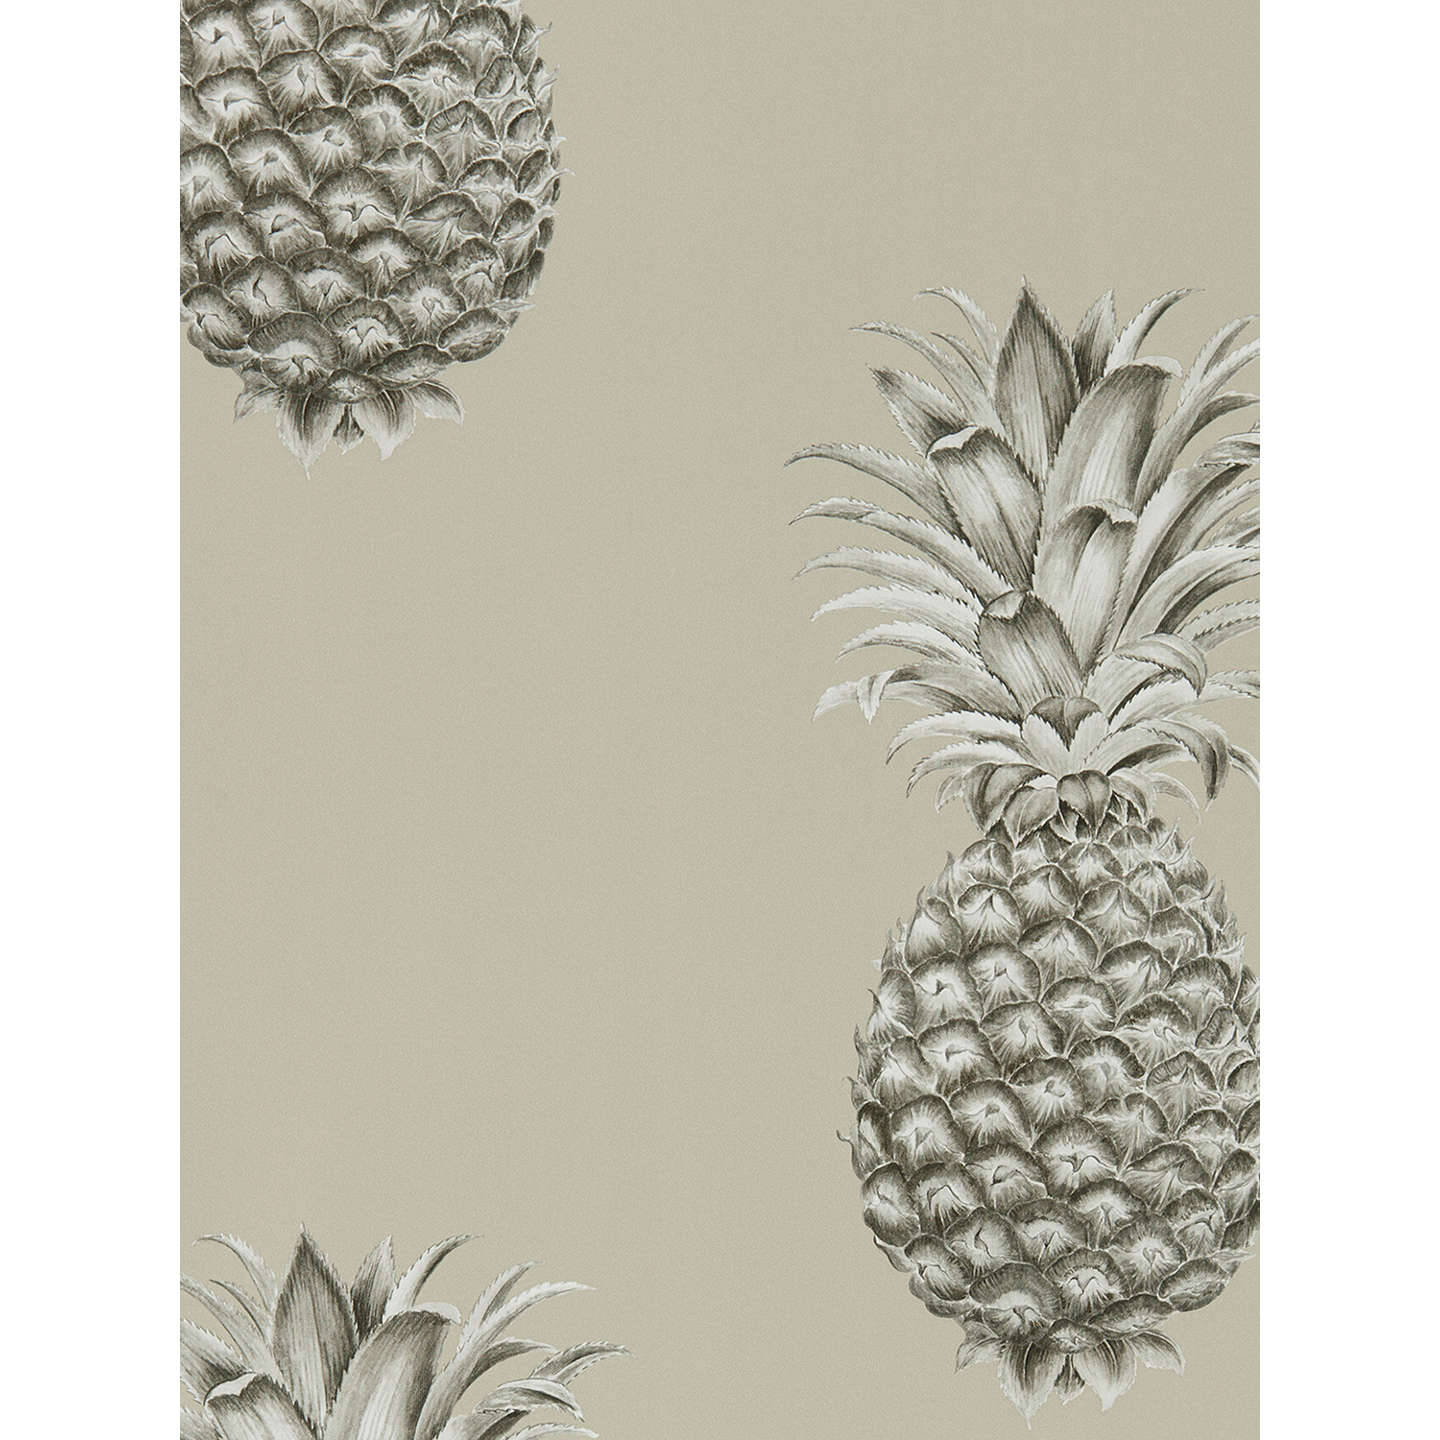 A Close-up Shot Of A Ripe Pineapple Sending A Reminder Of A Sweeter Life Background